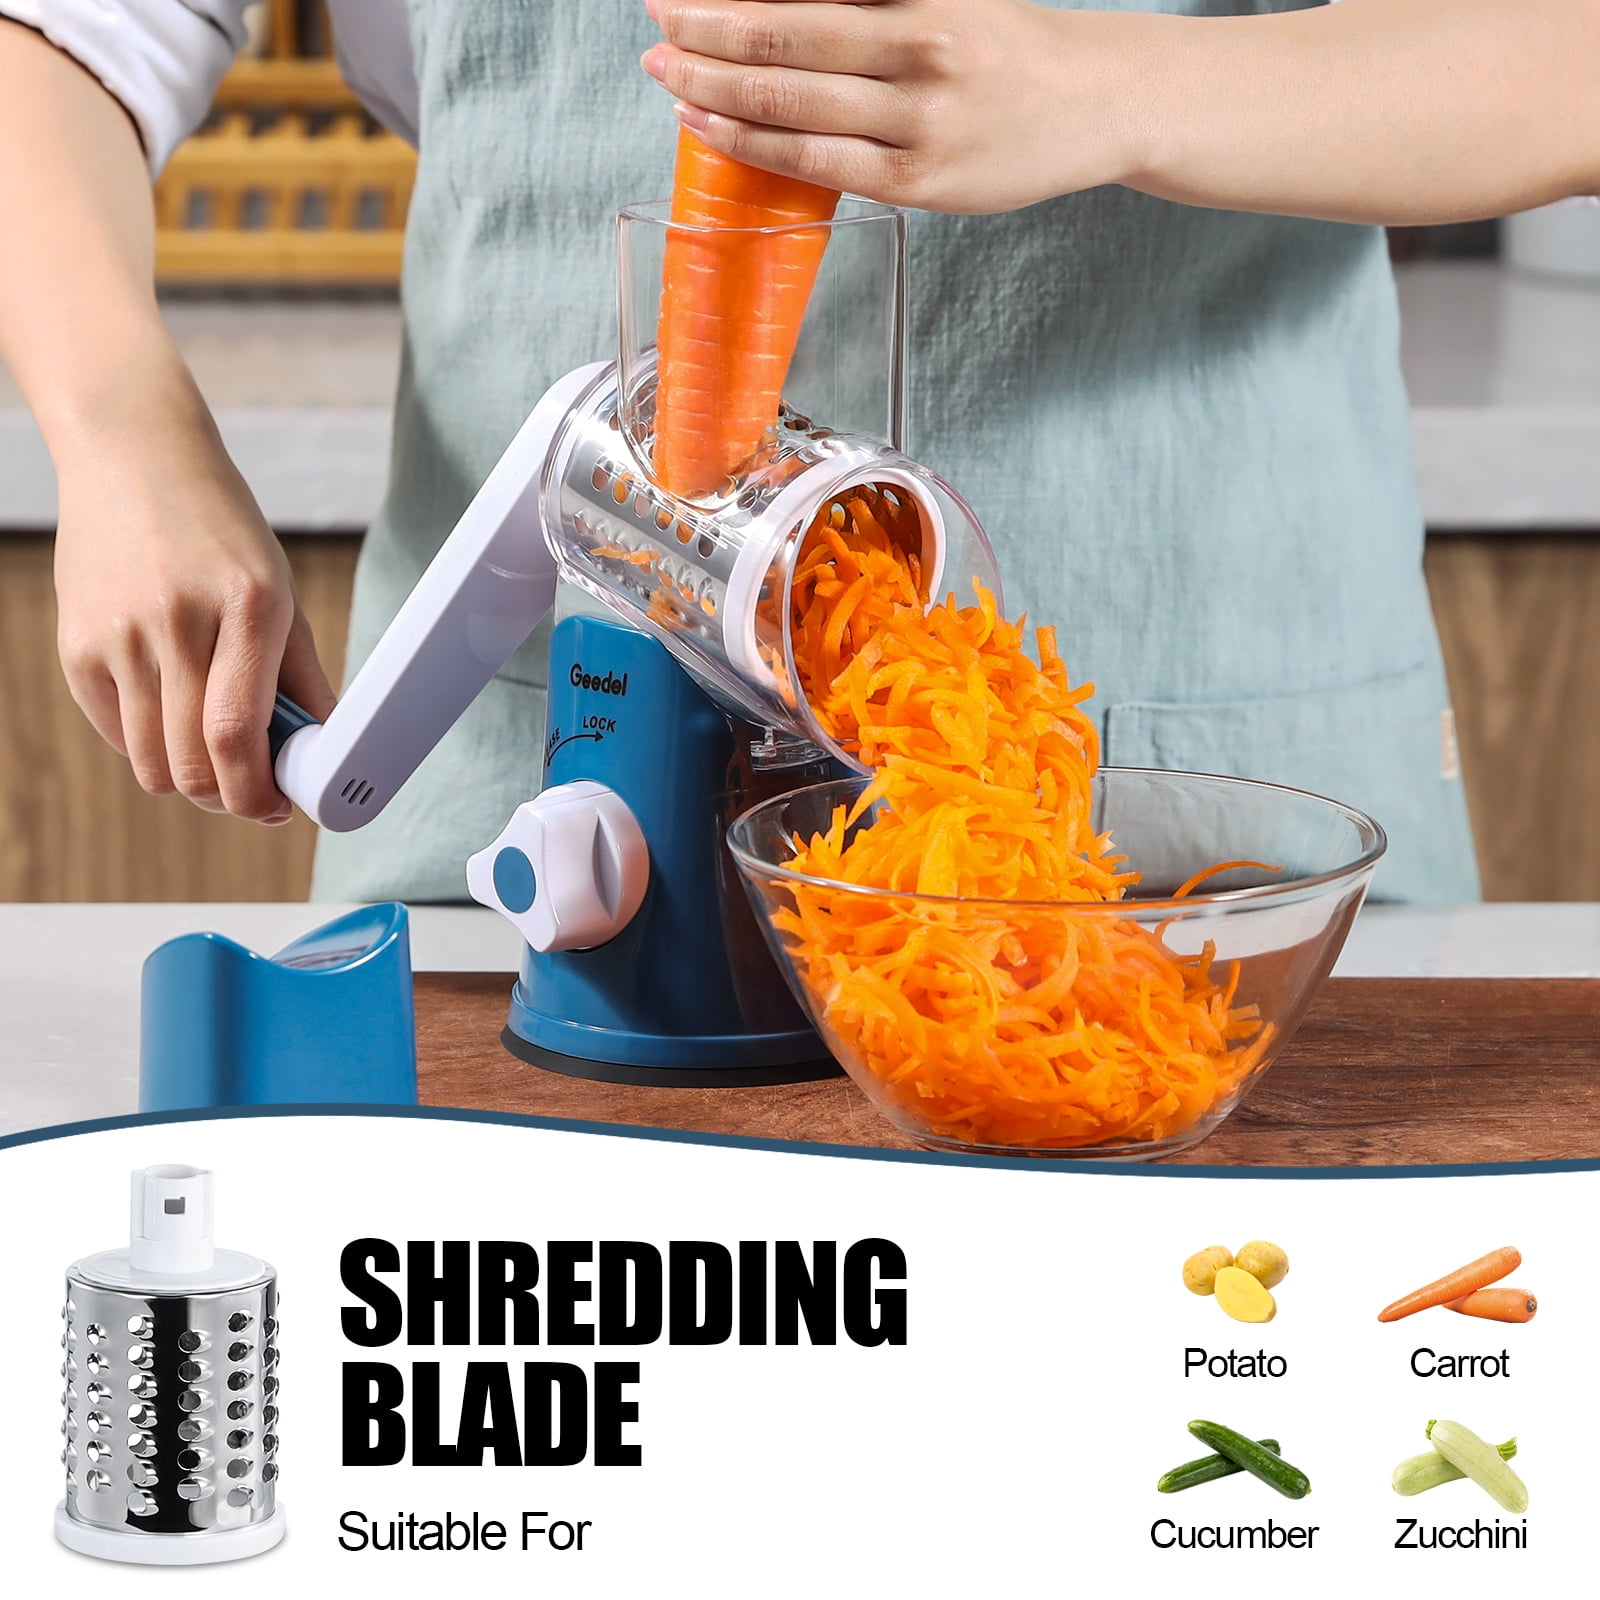 Geedel Rotray Chease Grater, Easy to Clean Vegetable Mandoline Slicer with 3 Drum Blades, High Efficiently Vegetable Spiralizer Cutter